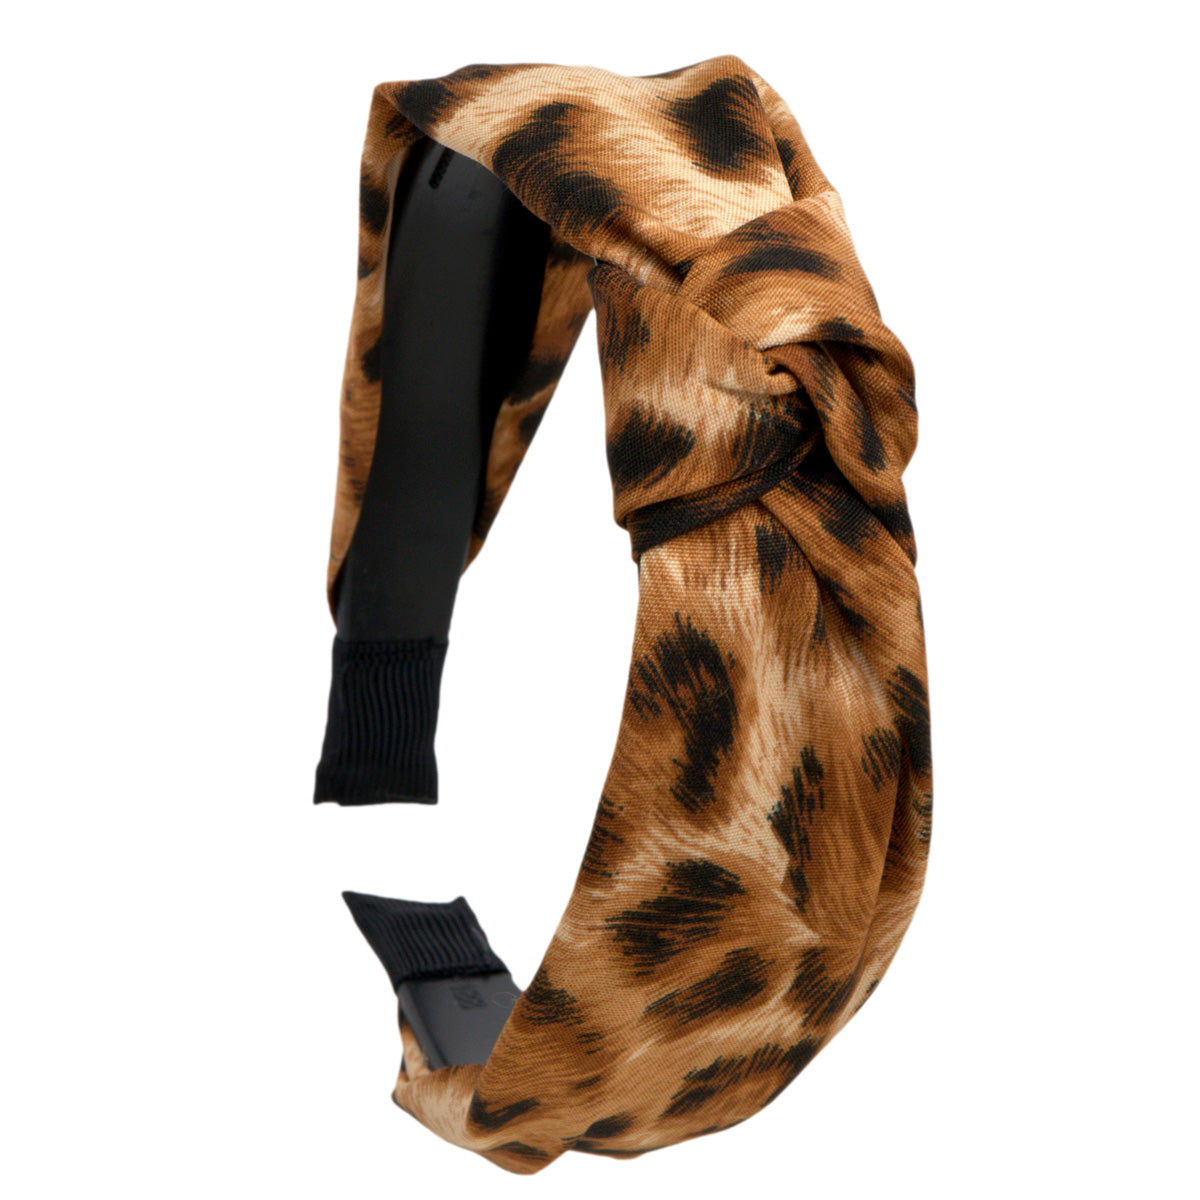 Animal patterned knot collar